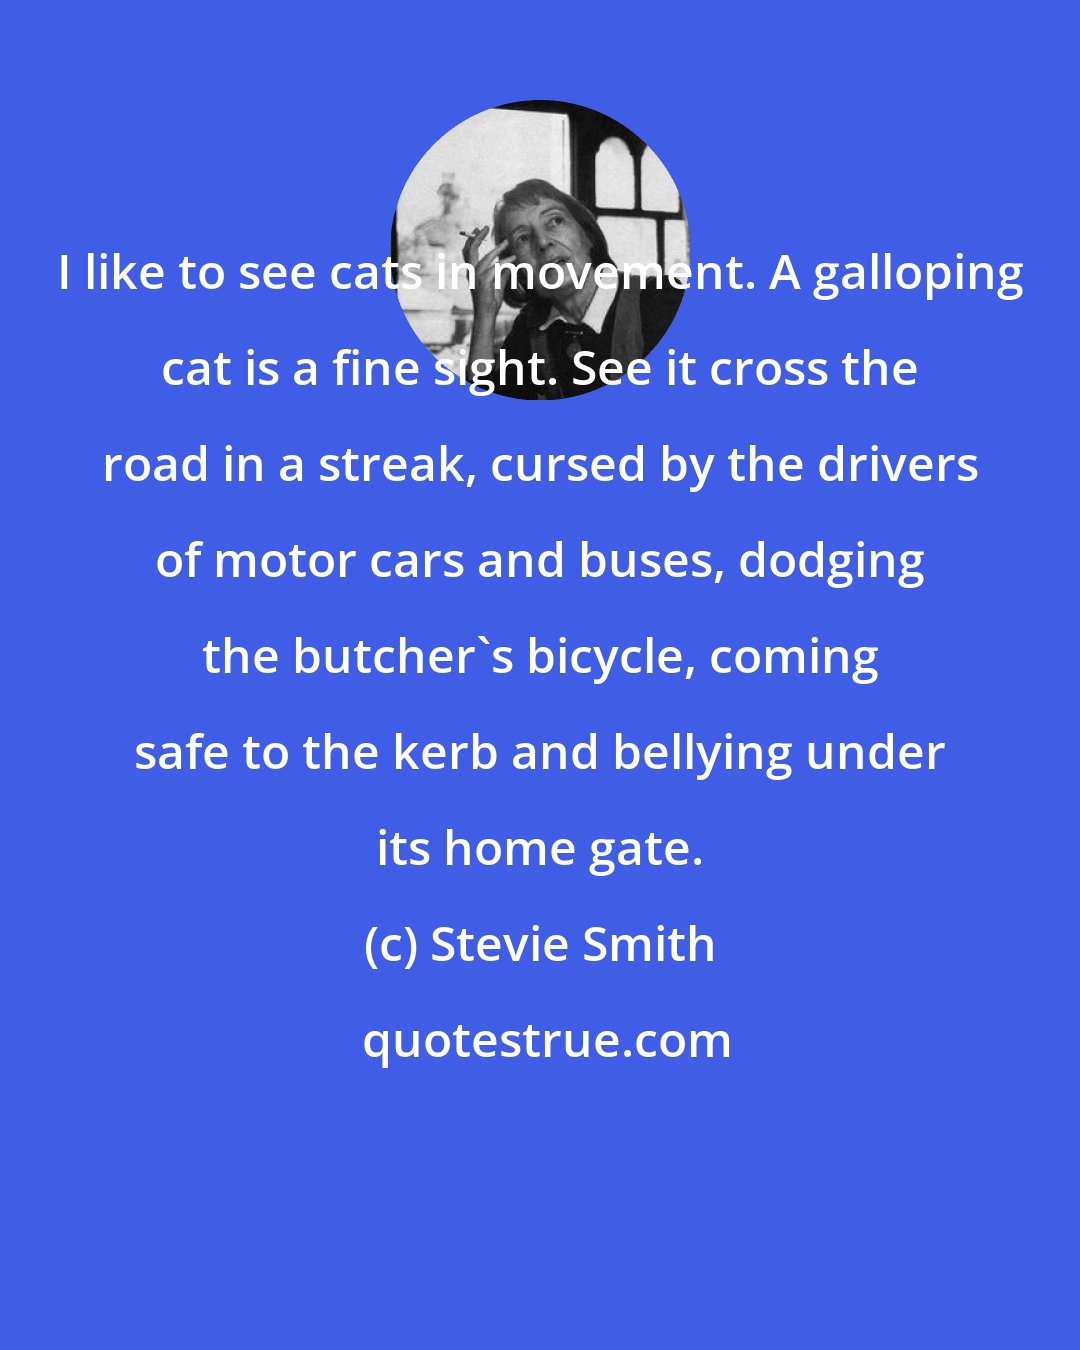 Stevie Smith: I like to see cats in movement. A galloping cat is a fine sight. See it cross the road in a streak, cursed by the drivers of motor cars and buses, dodging the butcher's bicycle, coming safe to the kerb and bellying under its home gate.